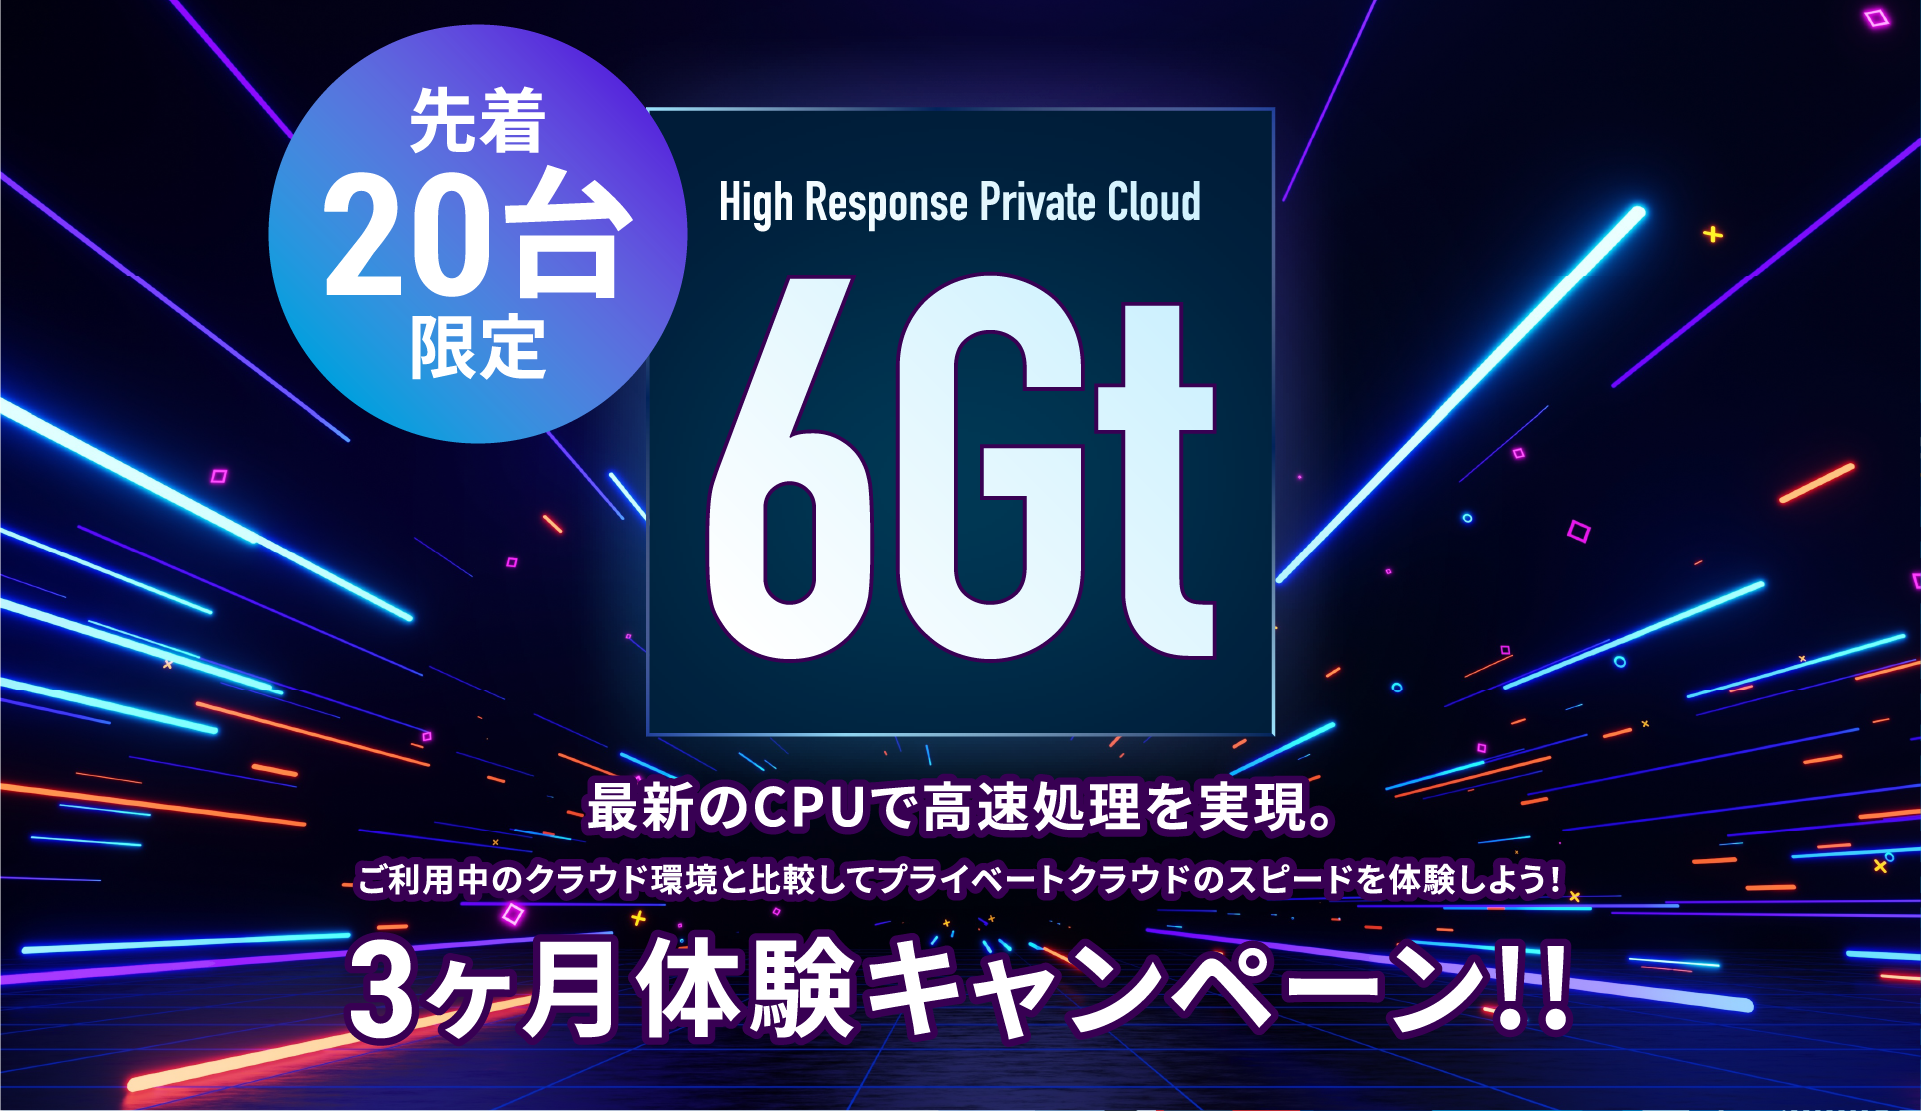 High Response Private Cloud 6Gt キャンペーン